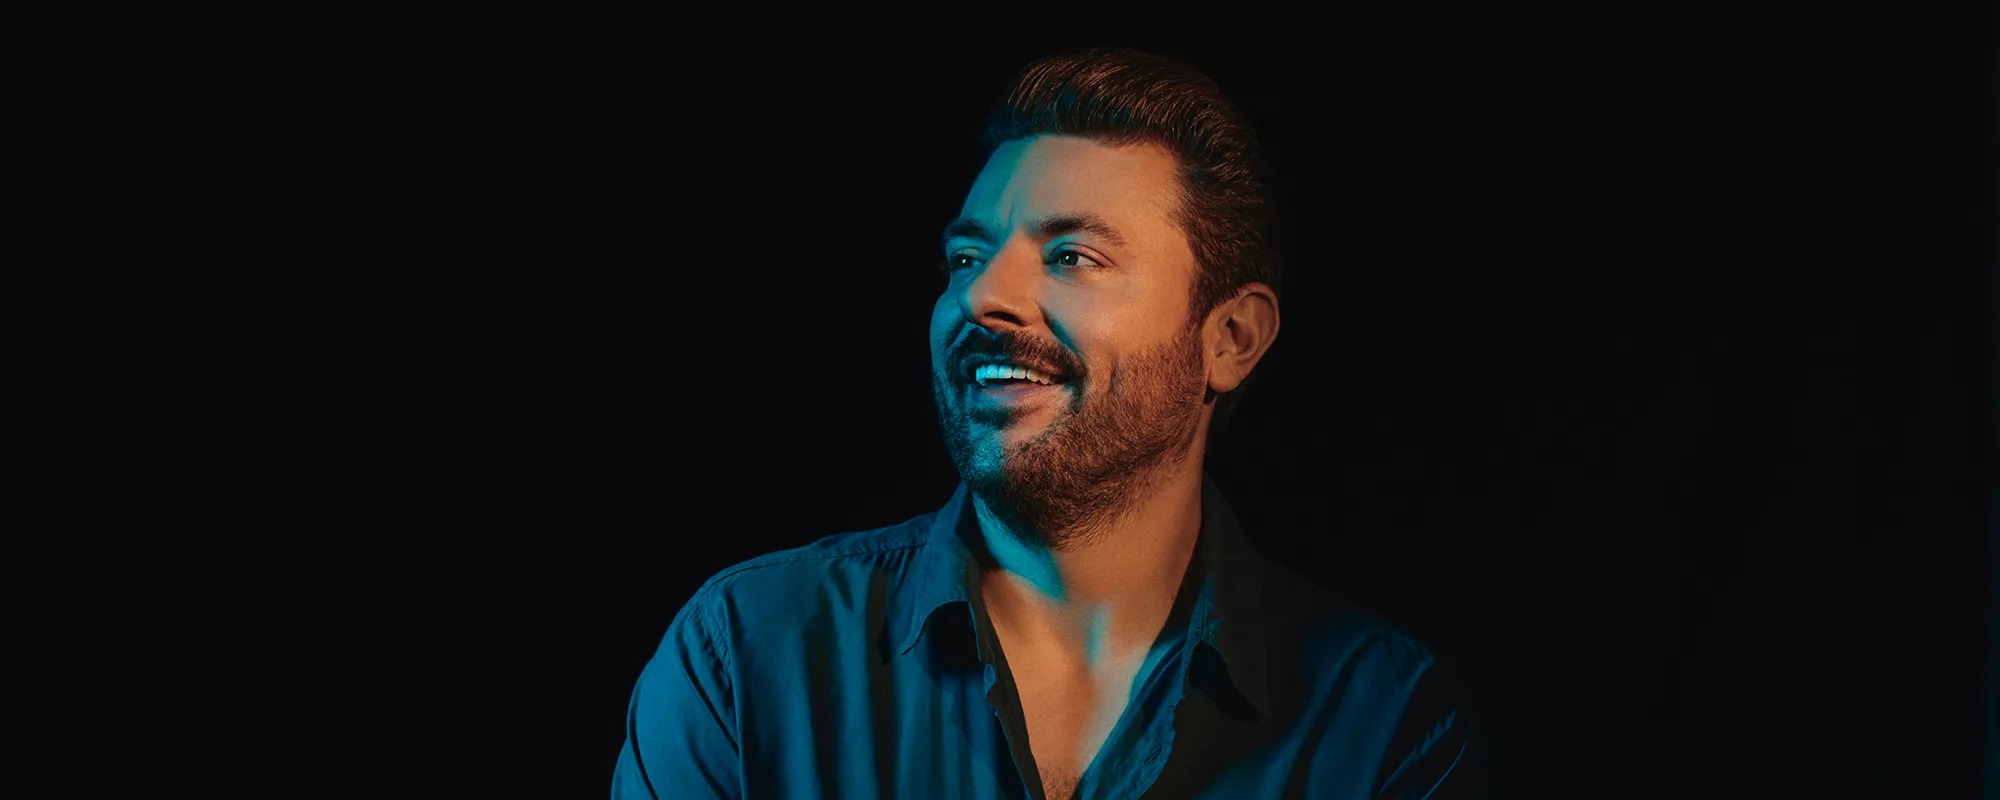 Chris Young Samples David Bowie in New Song “Young Love & Saturday Nights”